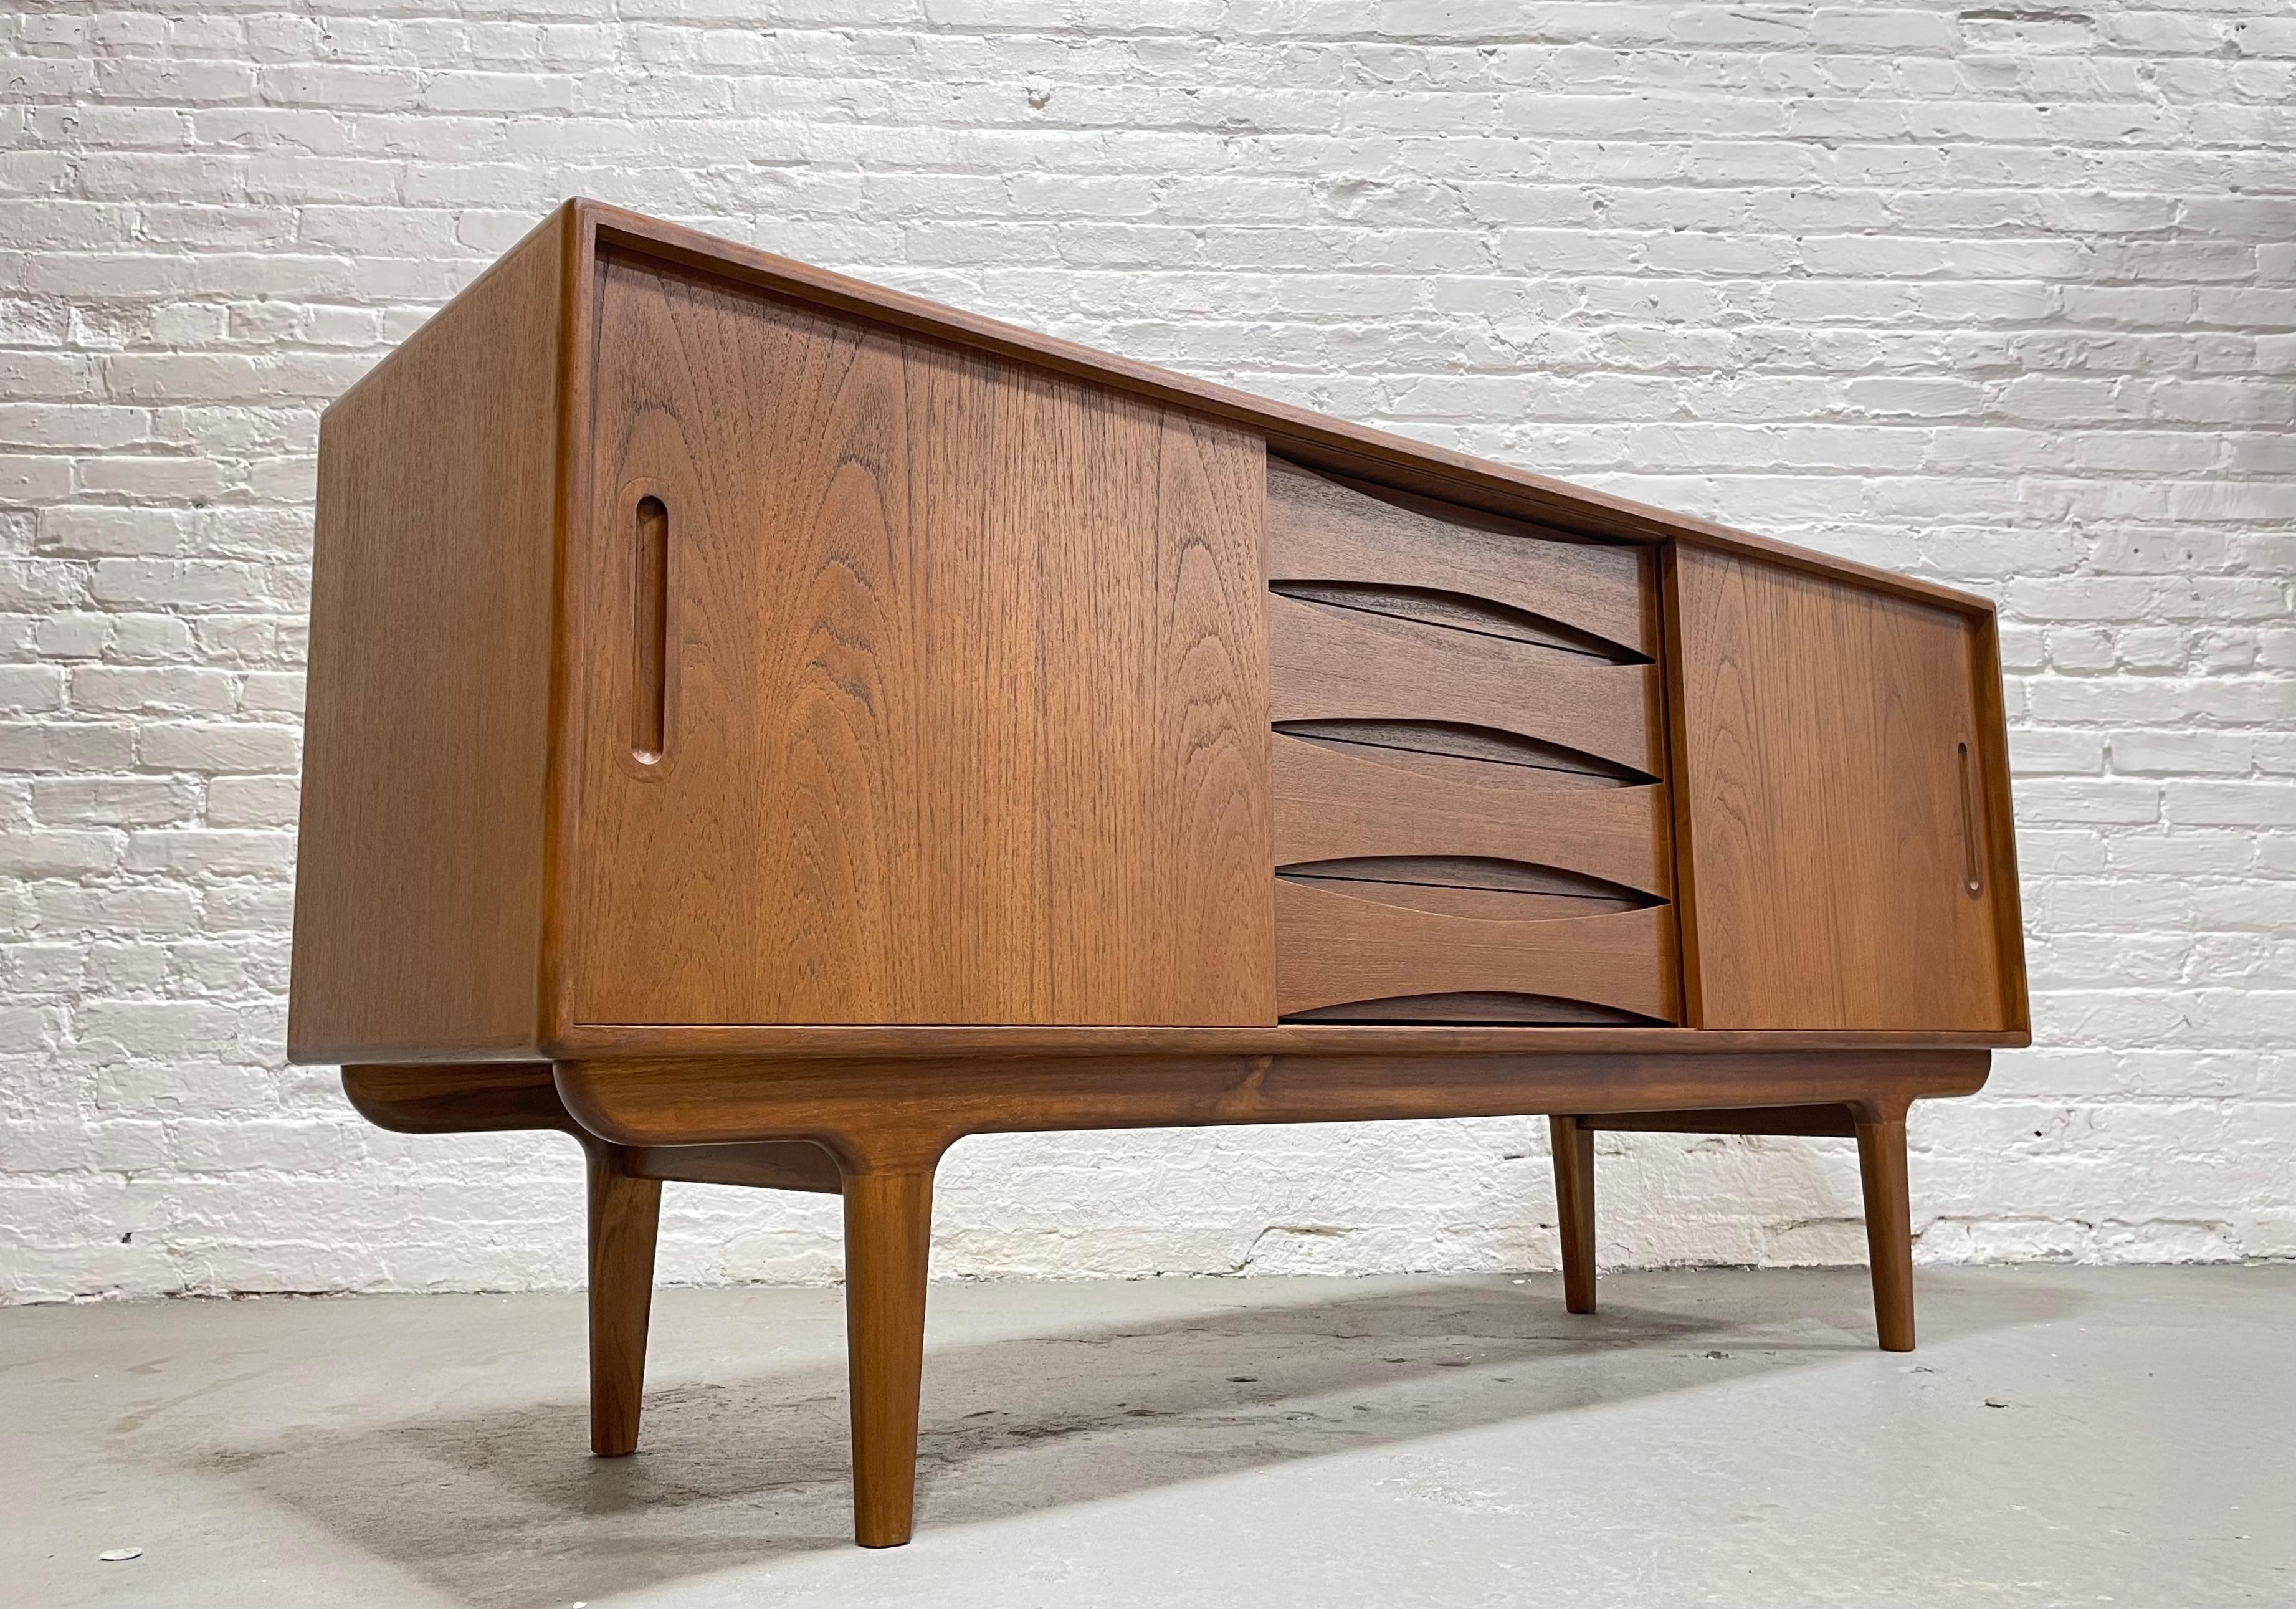 Classic Mid-Century Modern styled Handcrafted Credenza / Media stand. This gorgeous piece offers a wealth of storage space in its four streamlined center drawers and large shelving areas along either side. Super sleek modern design with the